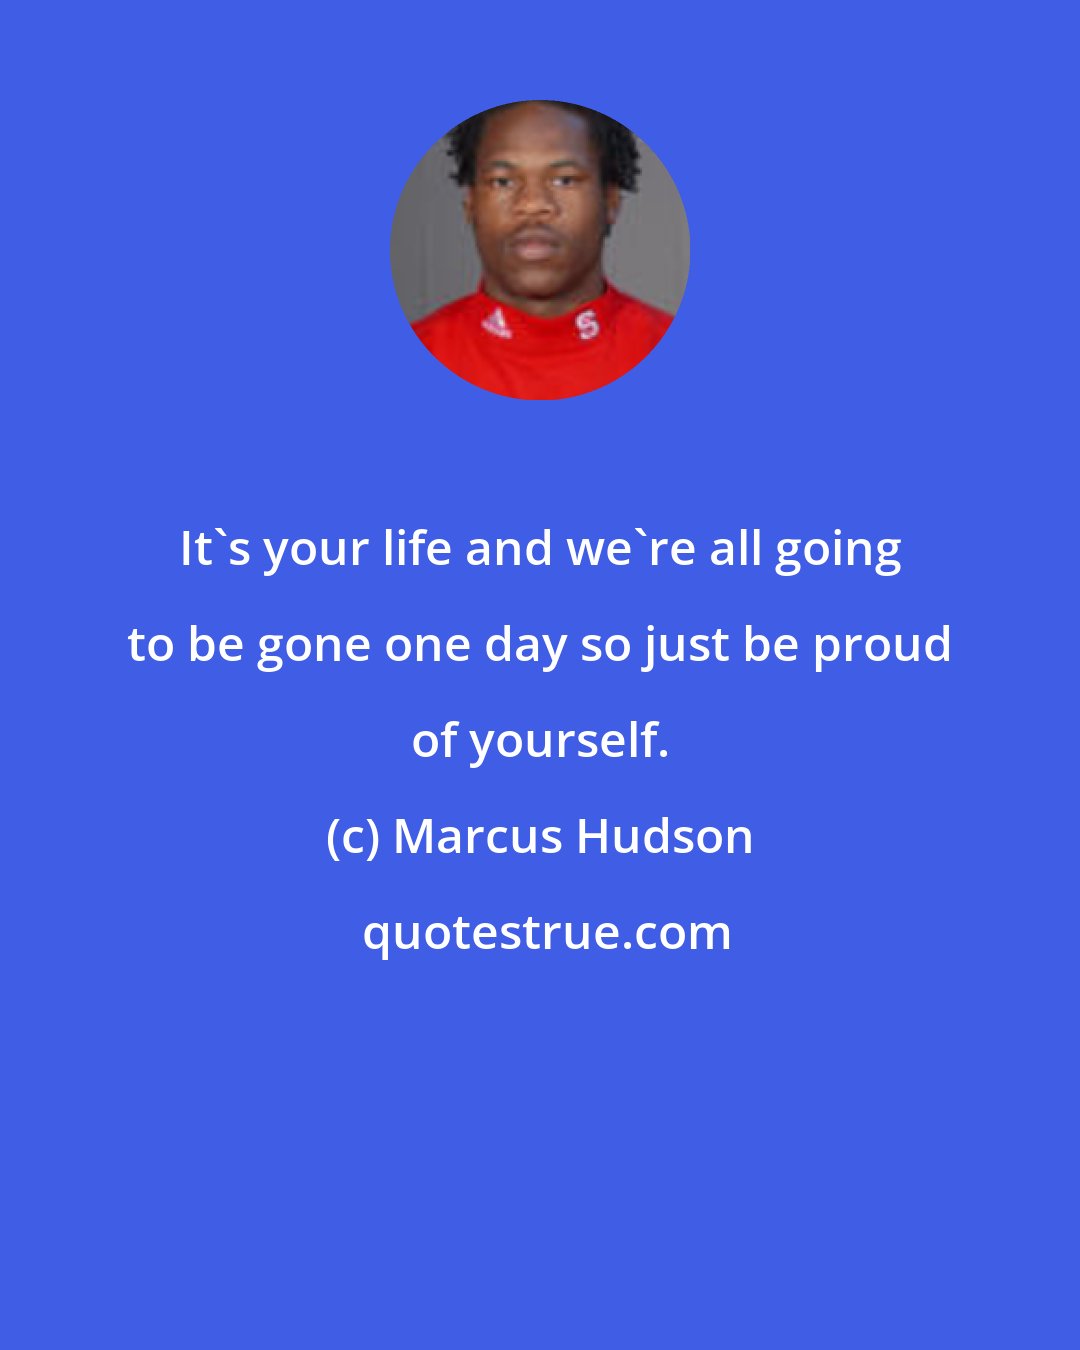 Marcus Hudson: It's your life and we're all going to be gone one day so just be proud of yourself.